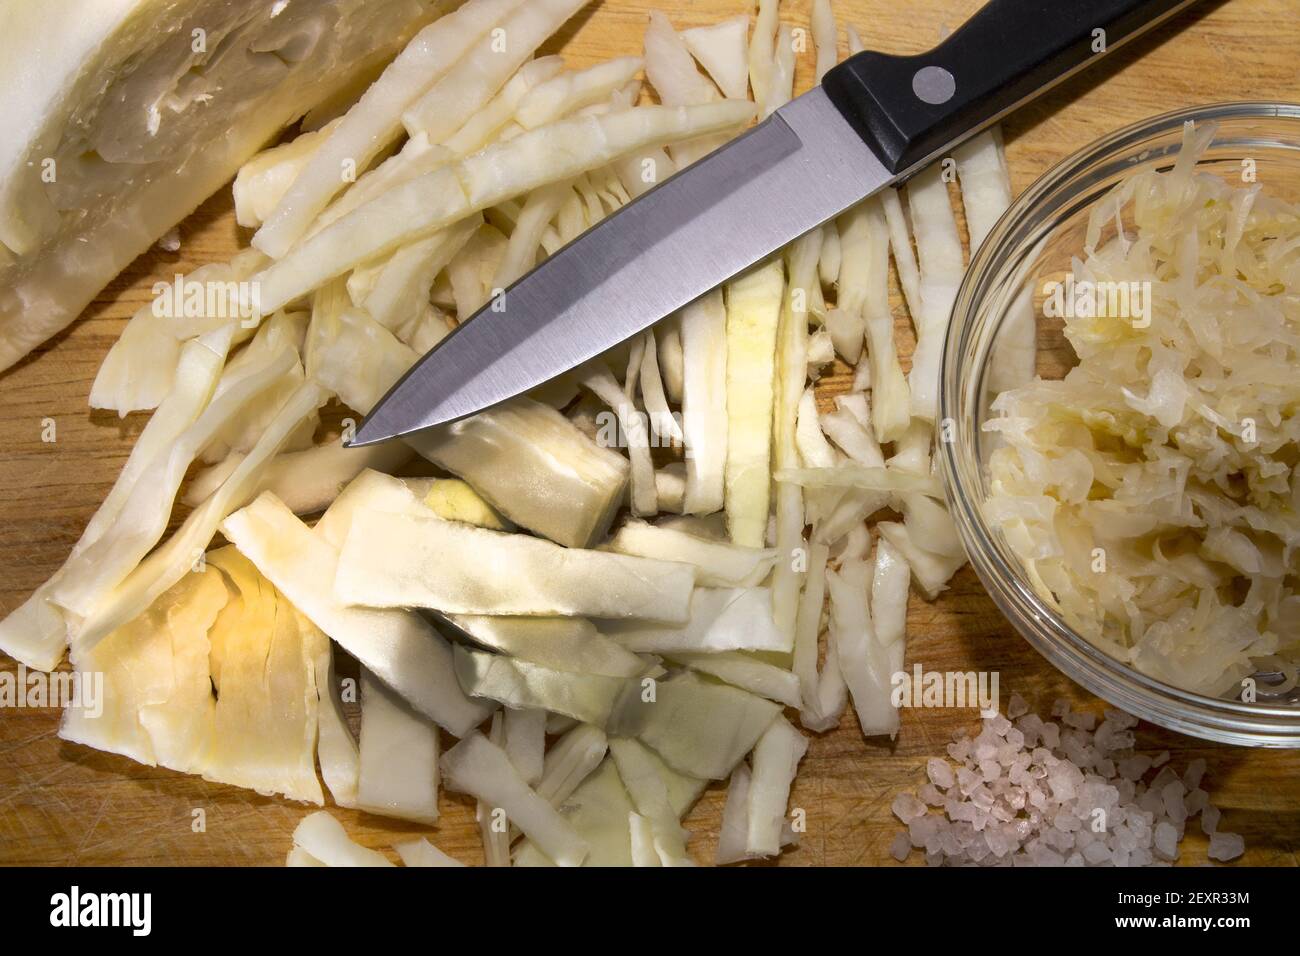 raw sauerkraut and sliced white cabbage with a knife on a wooden board Stock Photo